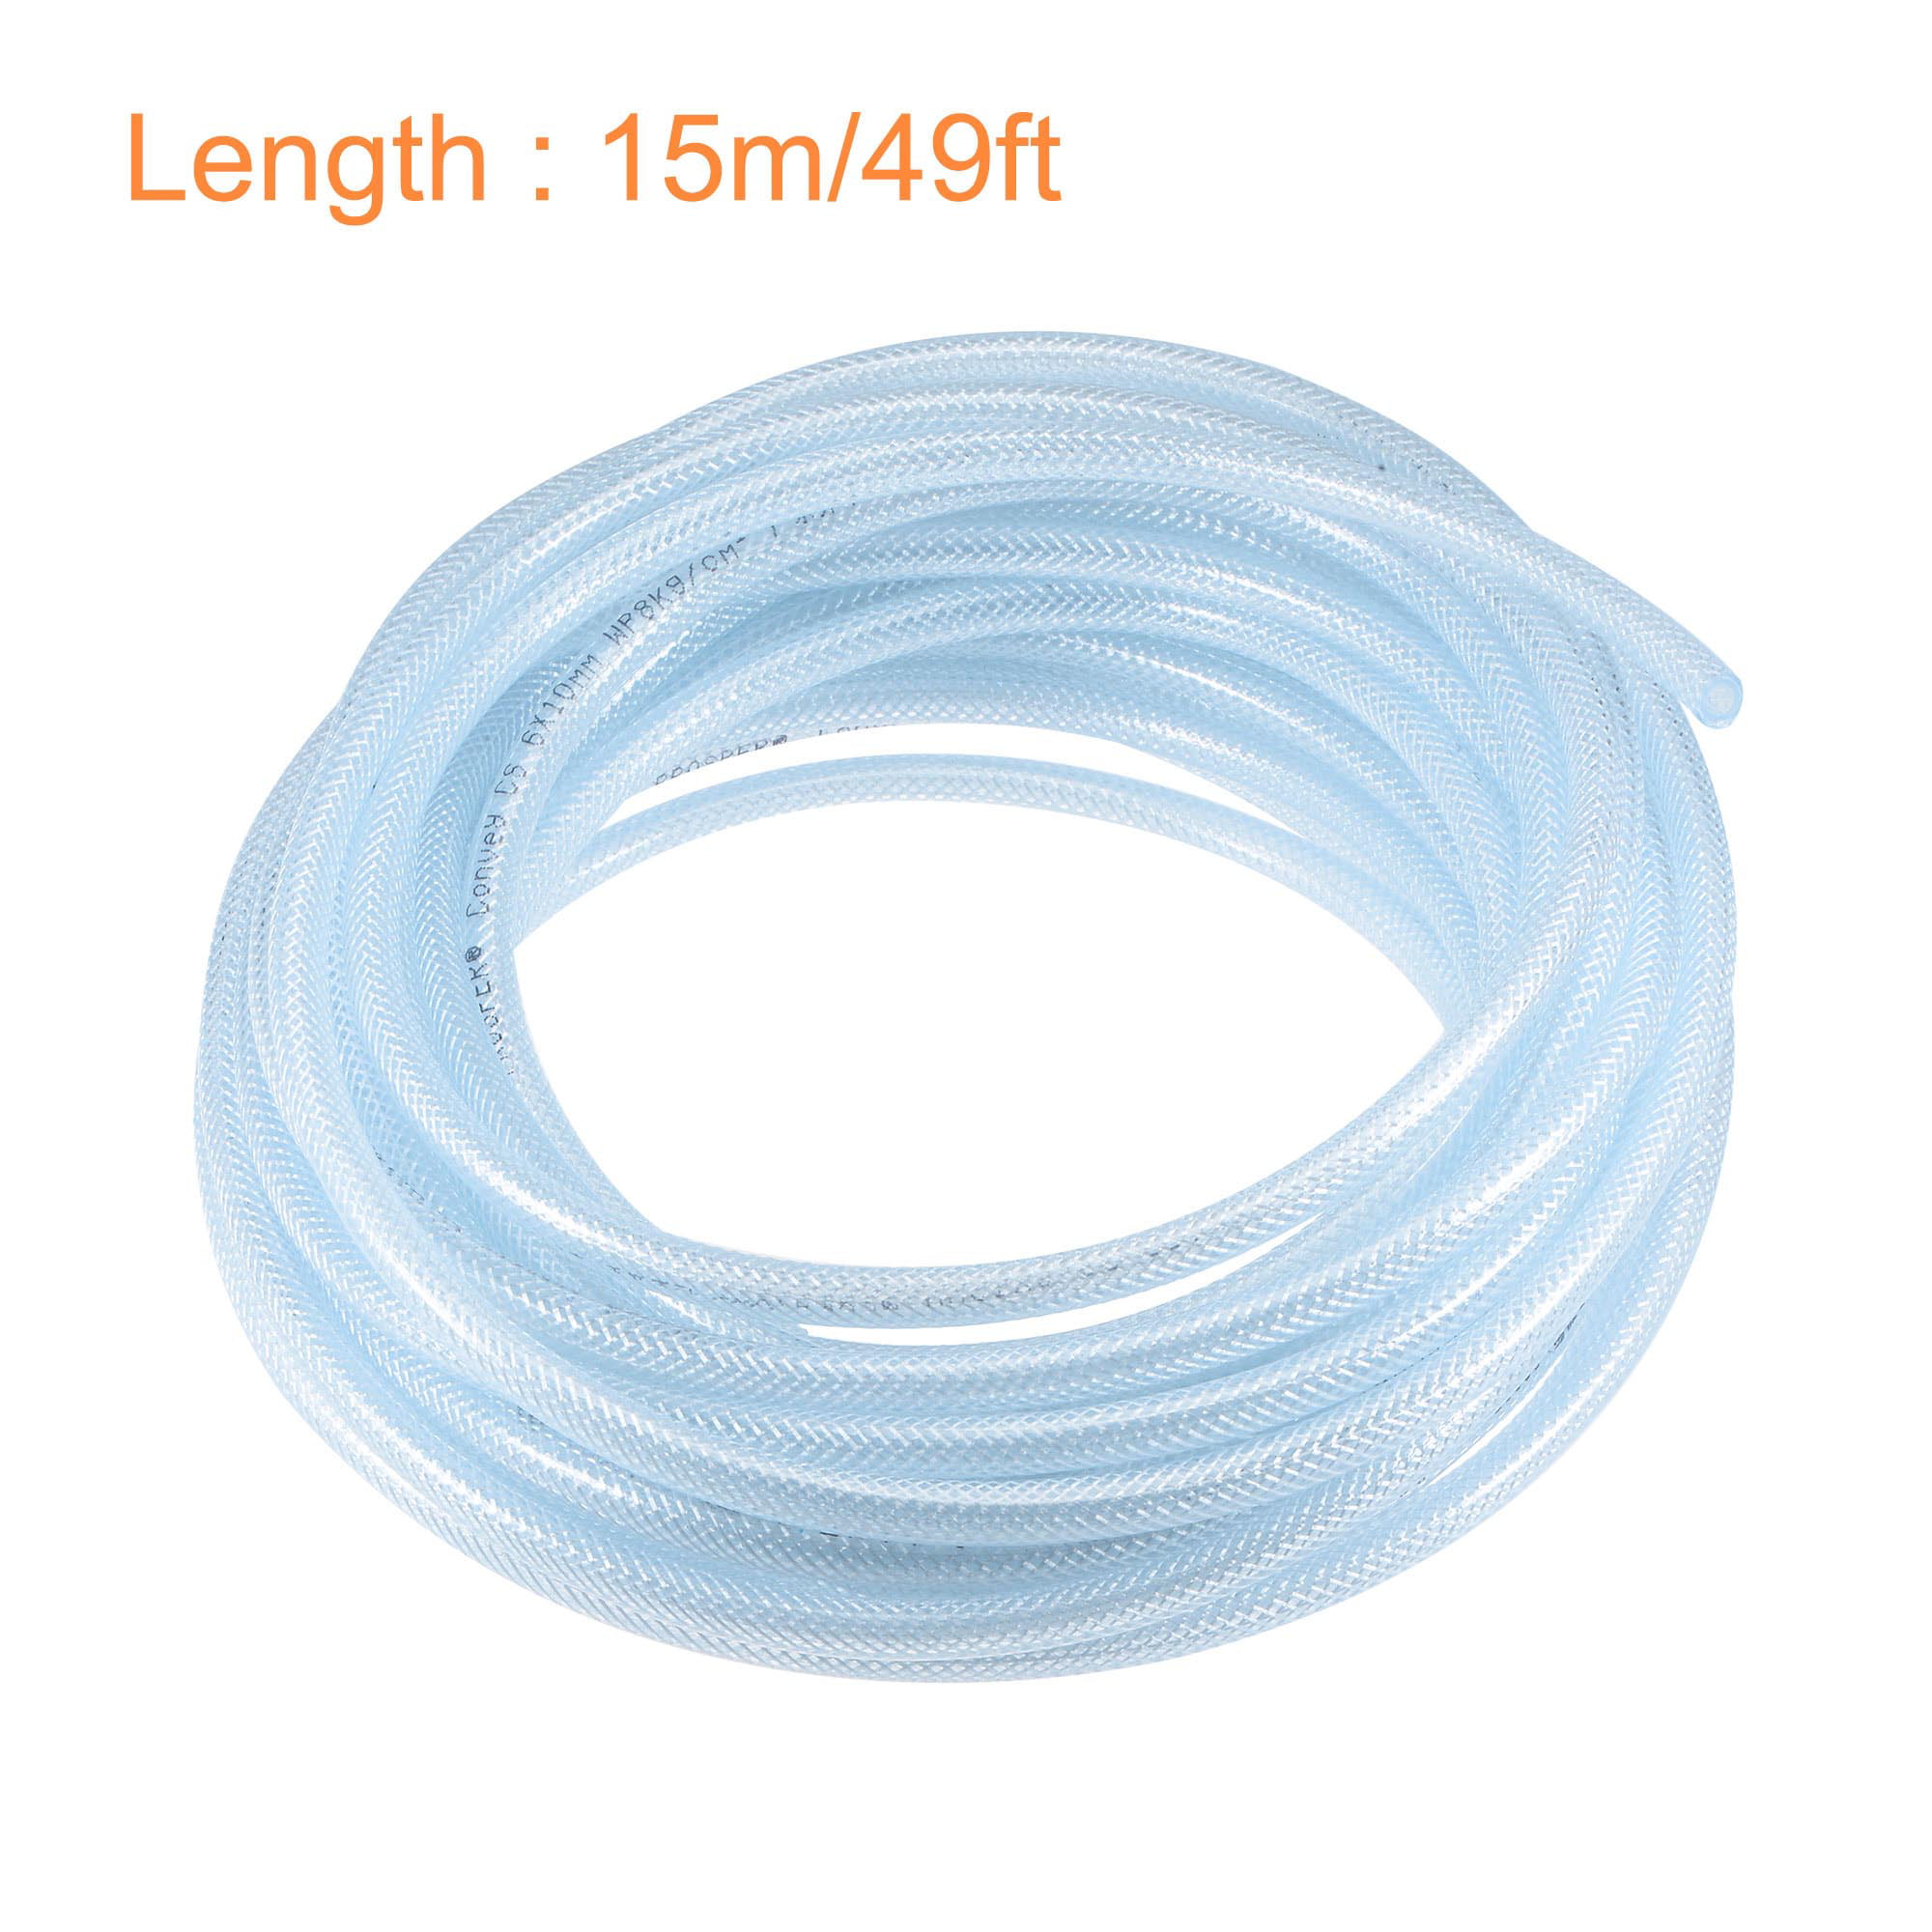 5Metres of High Pressure Gas Fuel Oil Injection Line Braid Tubing 10mm I/D Hose 